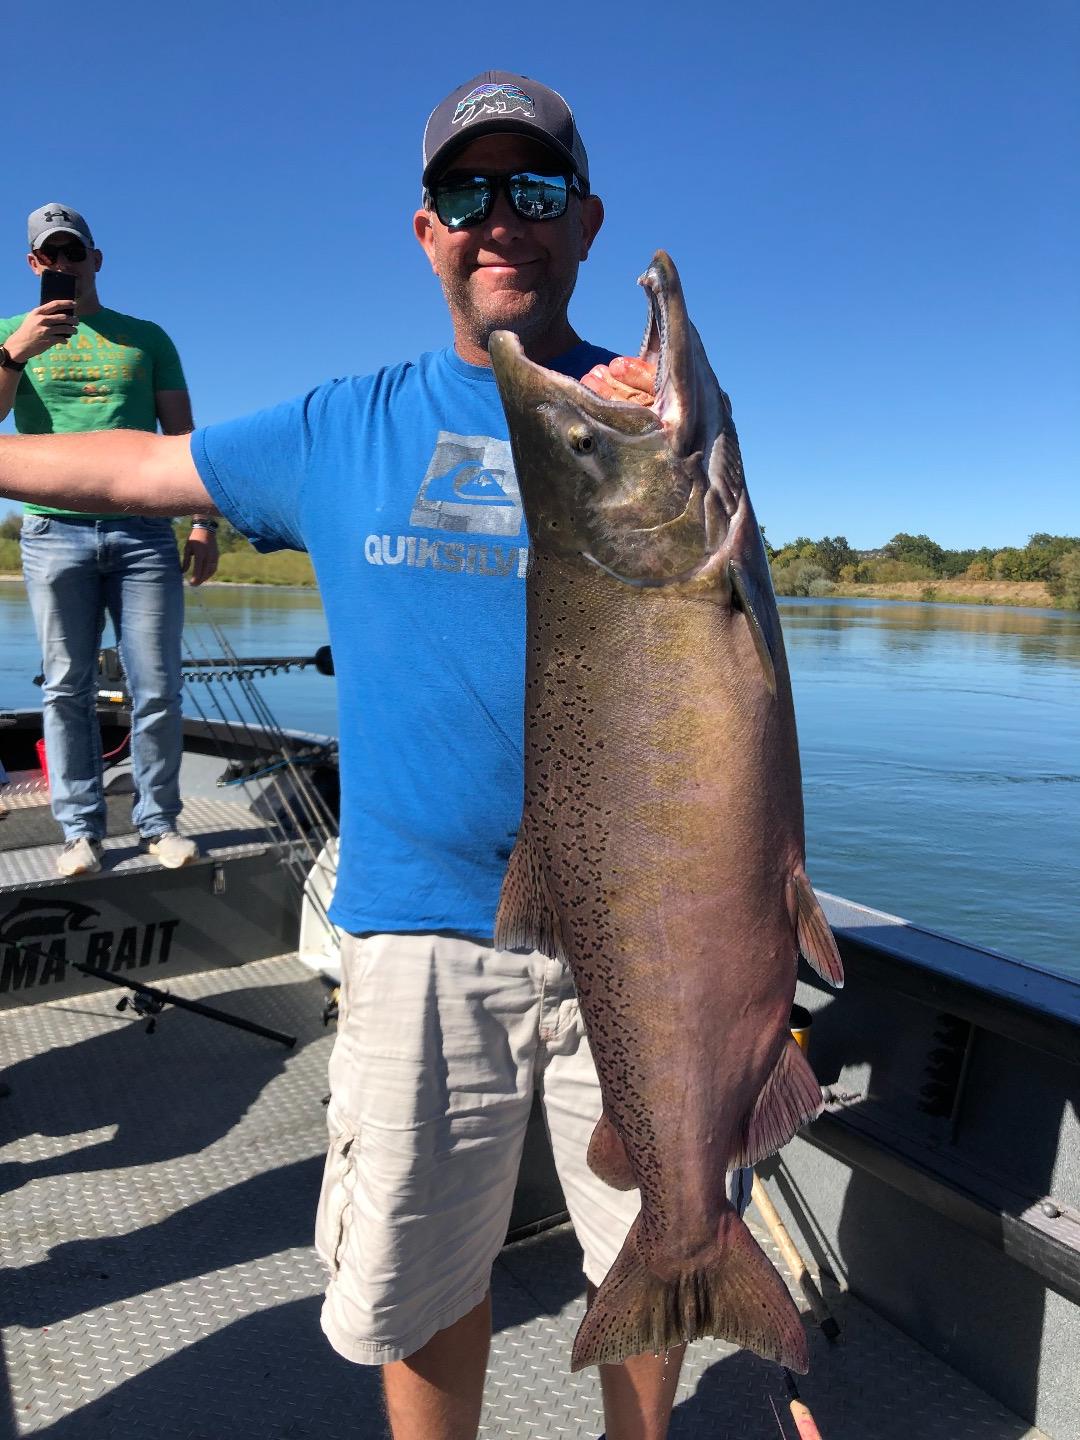 Constant weather changes for Sac River salmon